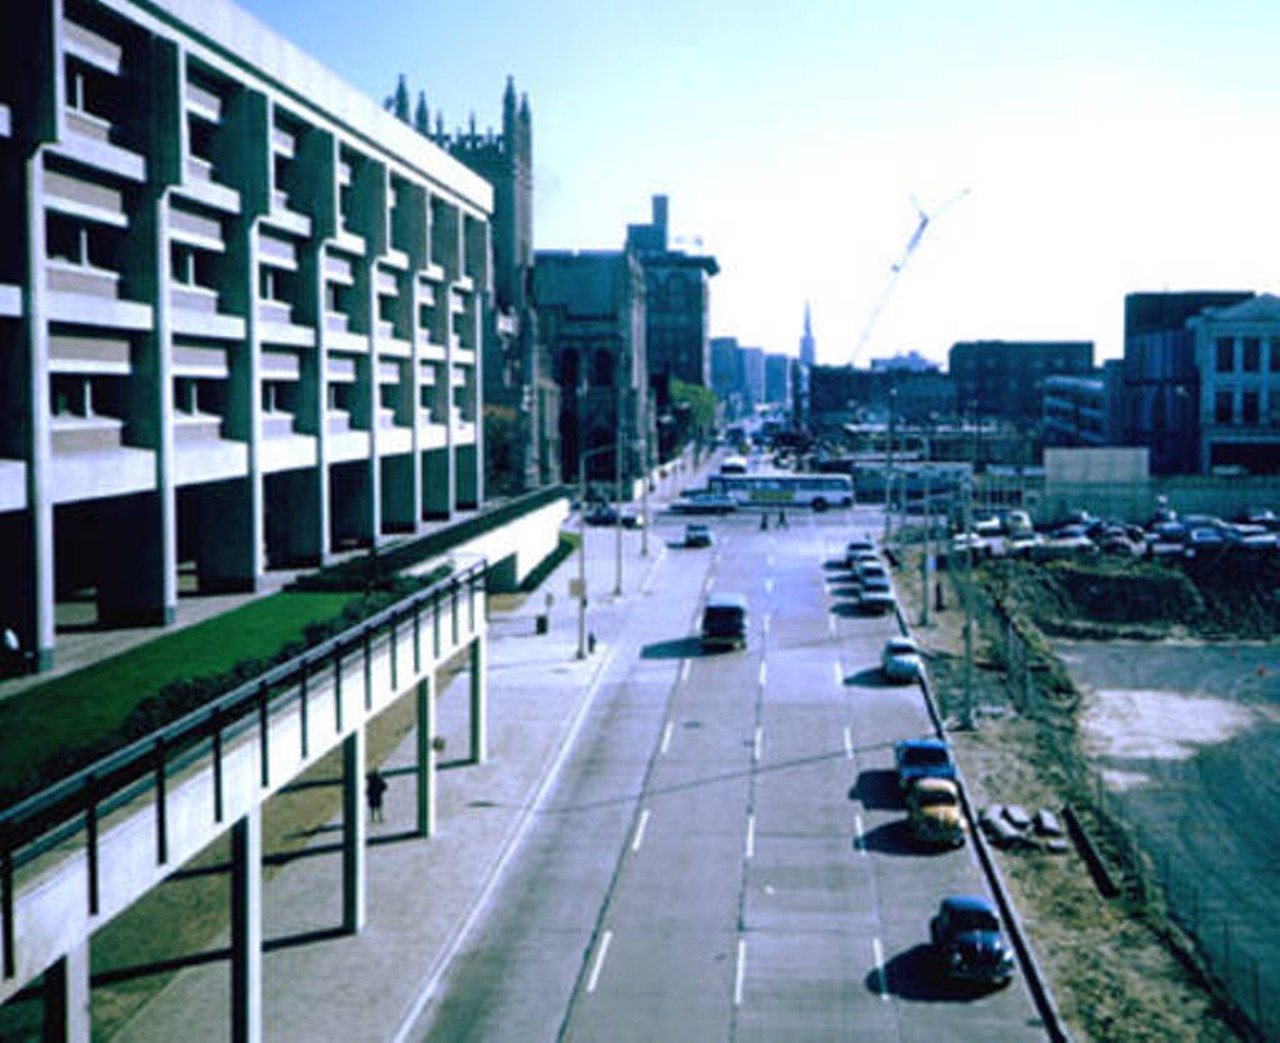 Cleveland State University, exterior view of East 22nd Street towards South. Also seen in image is the Main Classroom Building. 1971